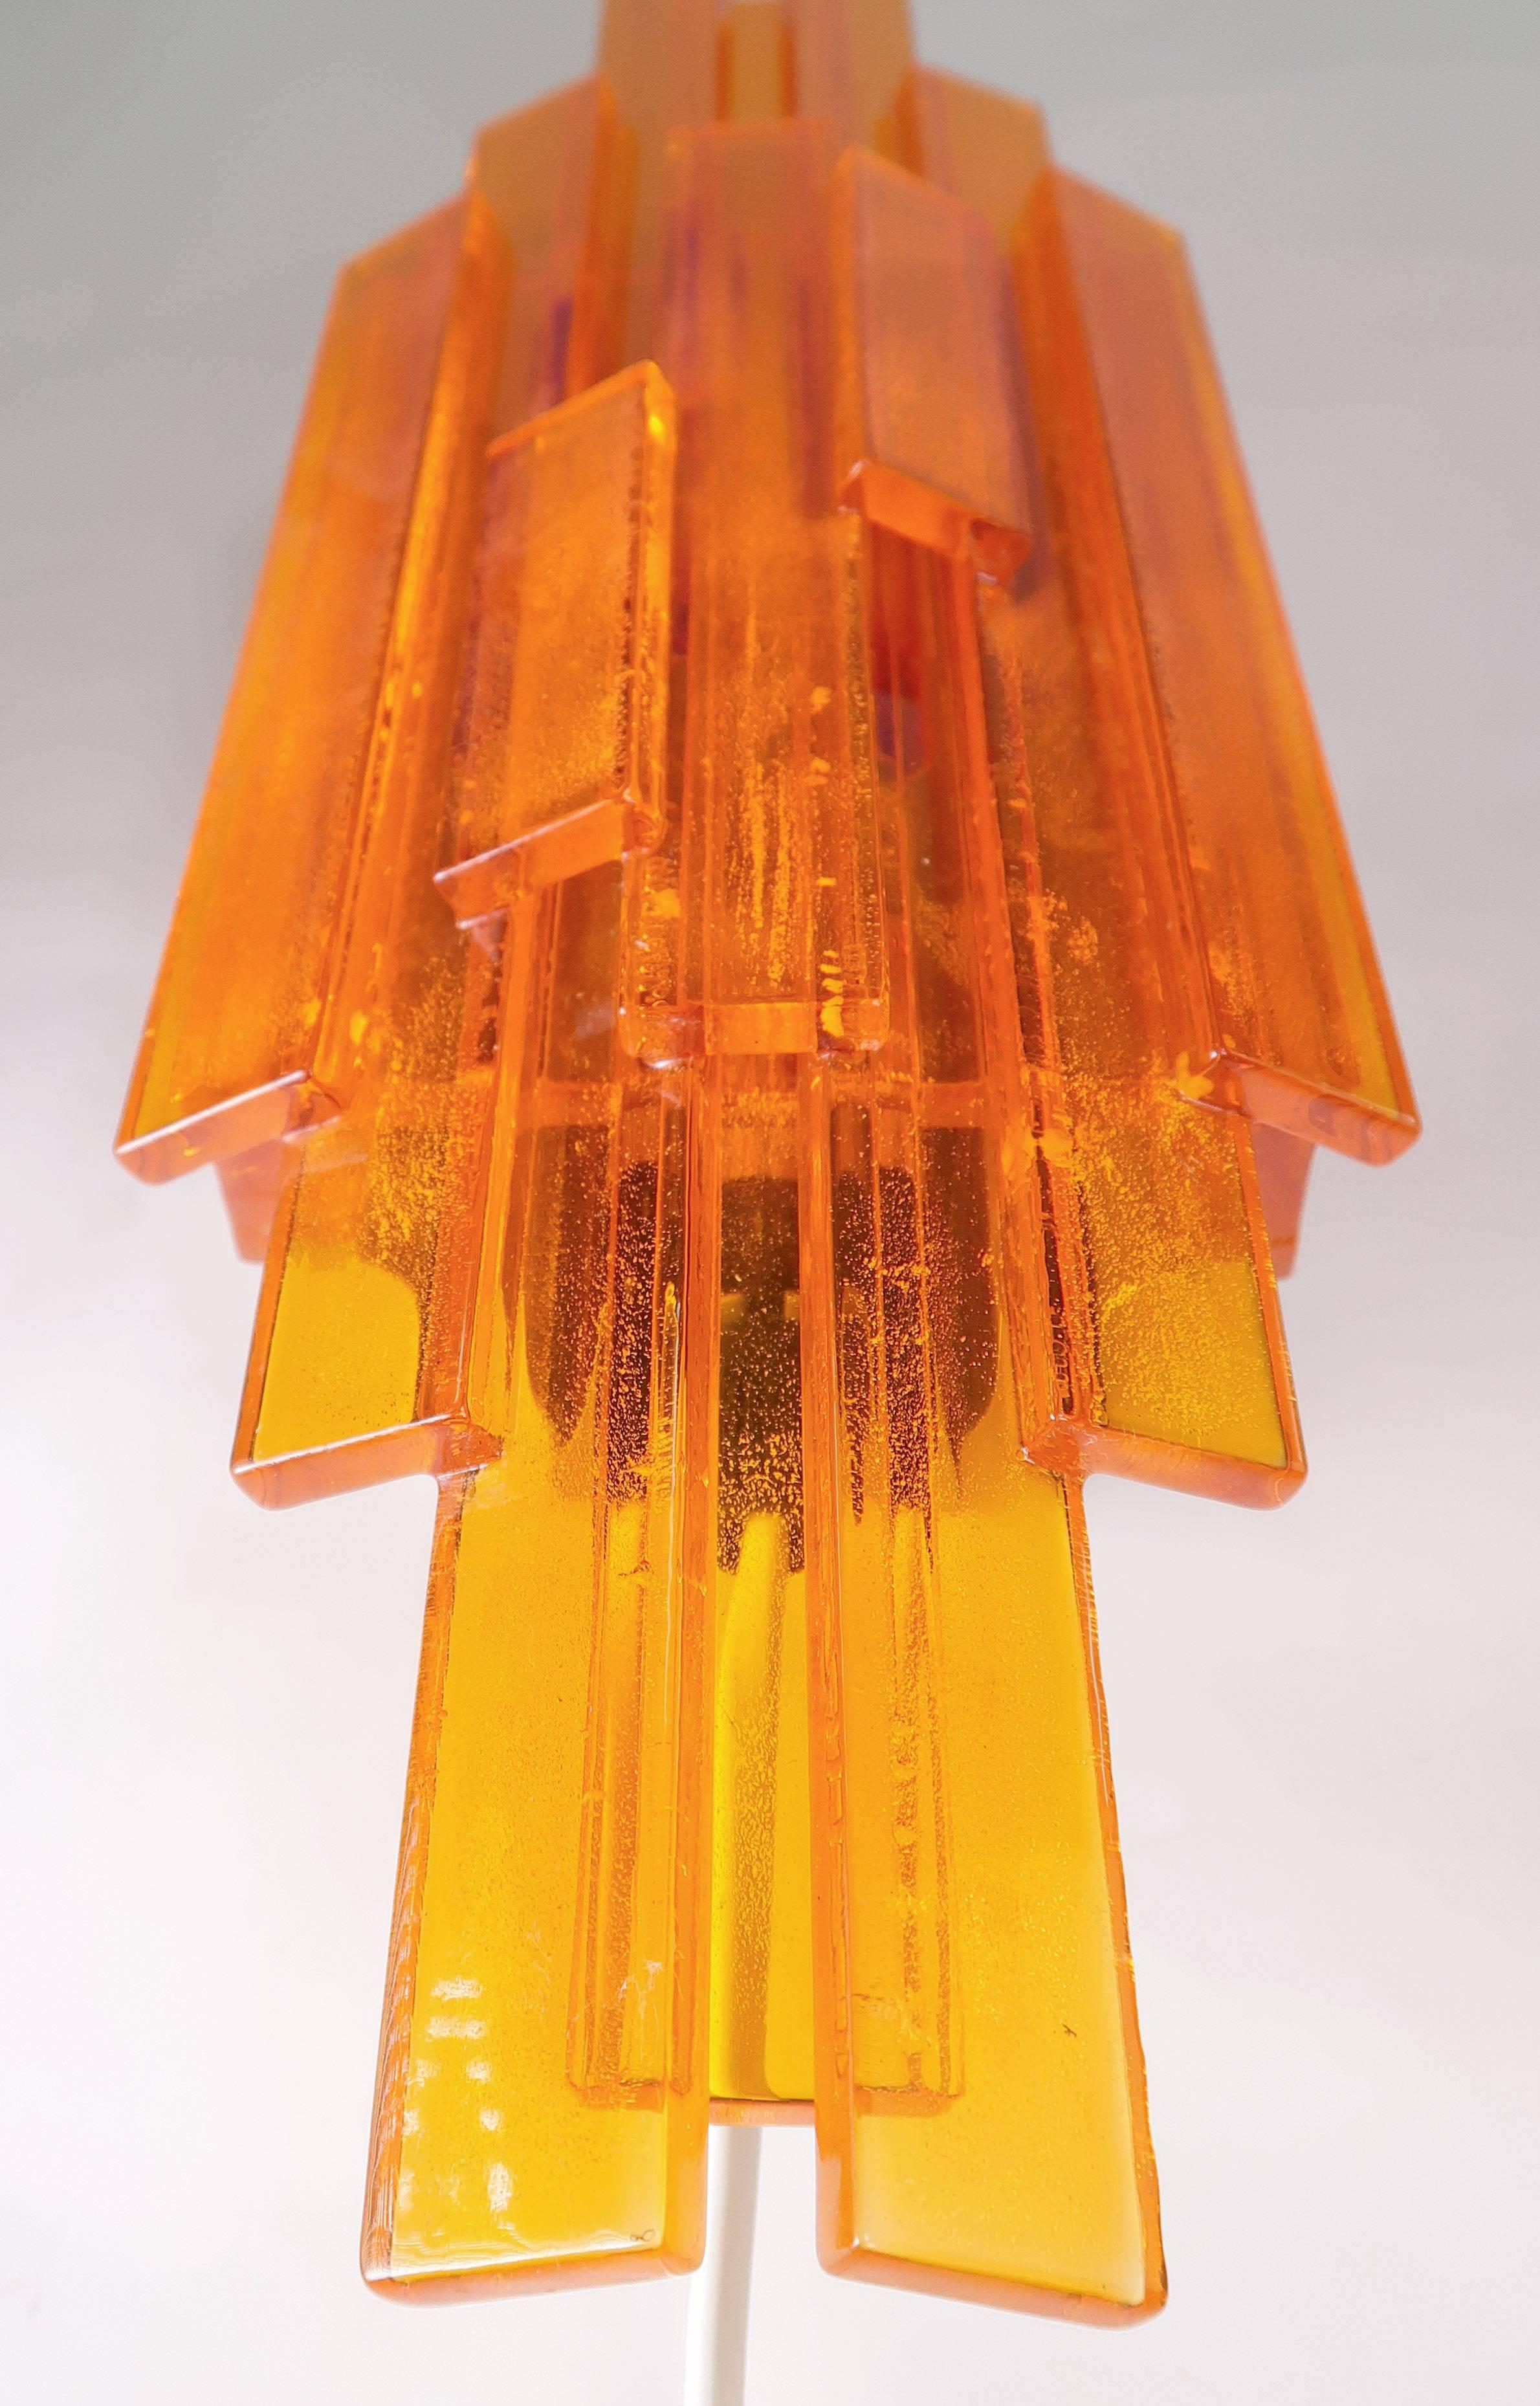 Metal Trio of Danish Space Age Orange Acrylic Wall Lights by Claus Bolby, 1975